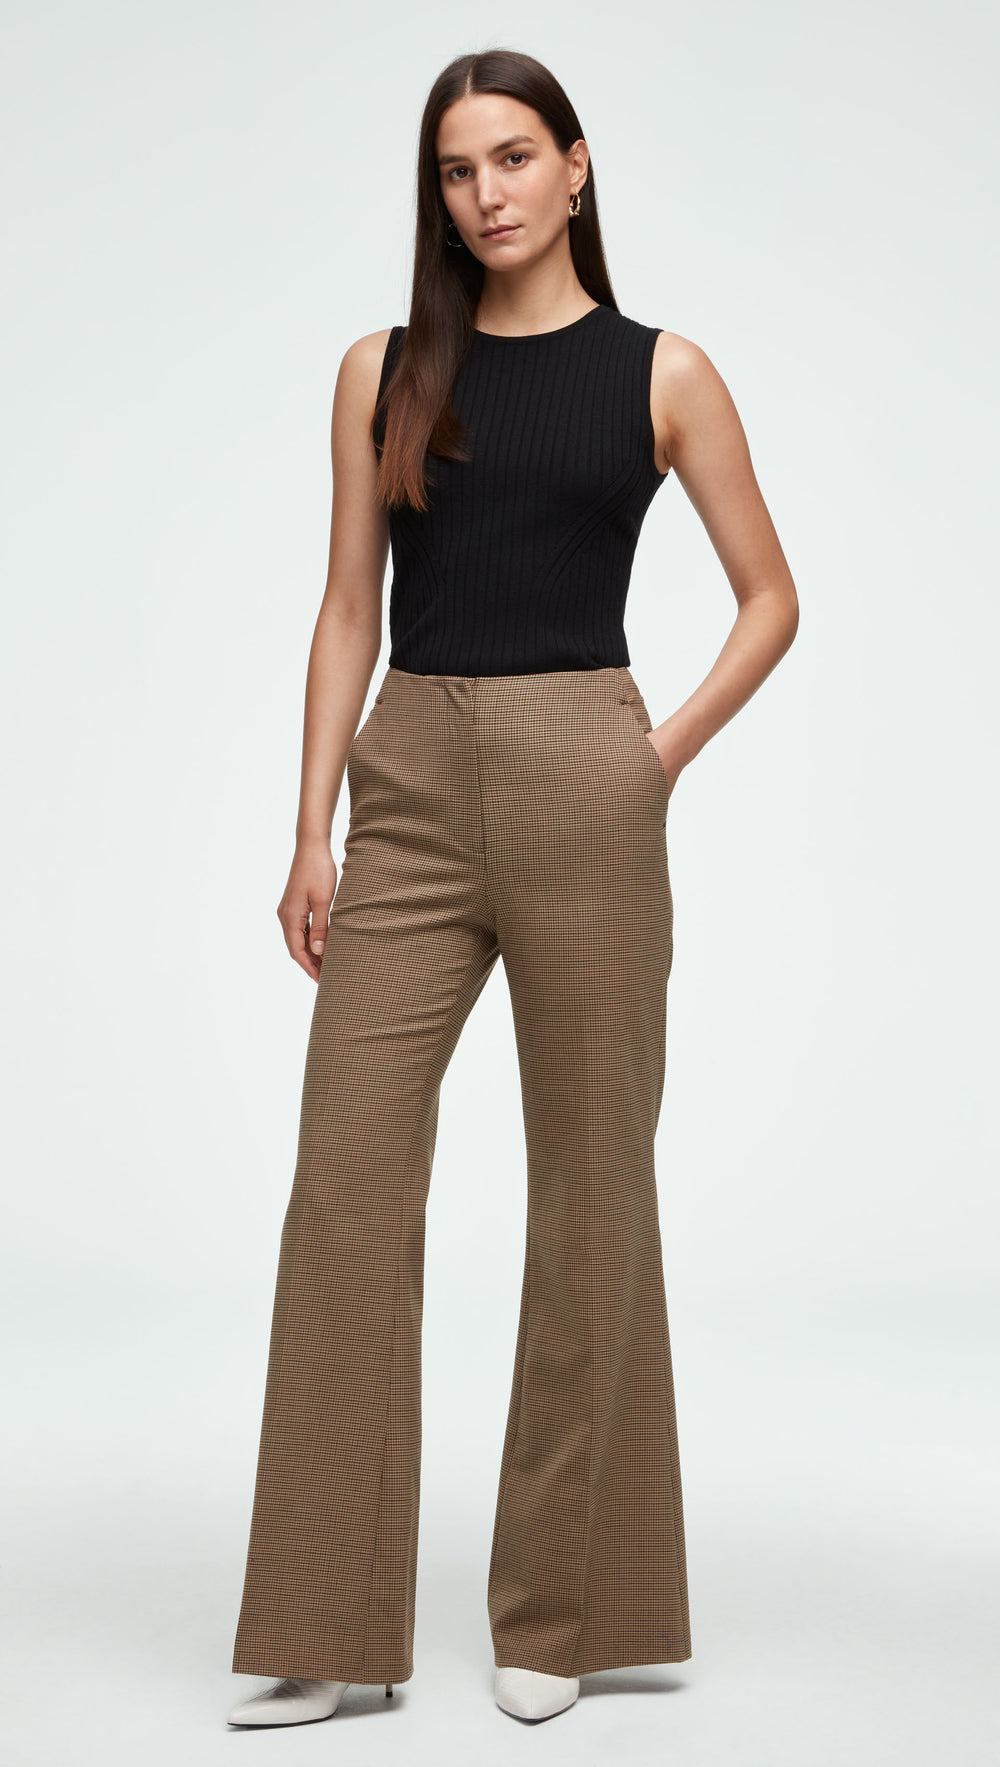 High-Waisted Flare Trouser in Stretch Wool, Women's Pants